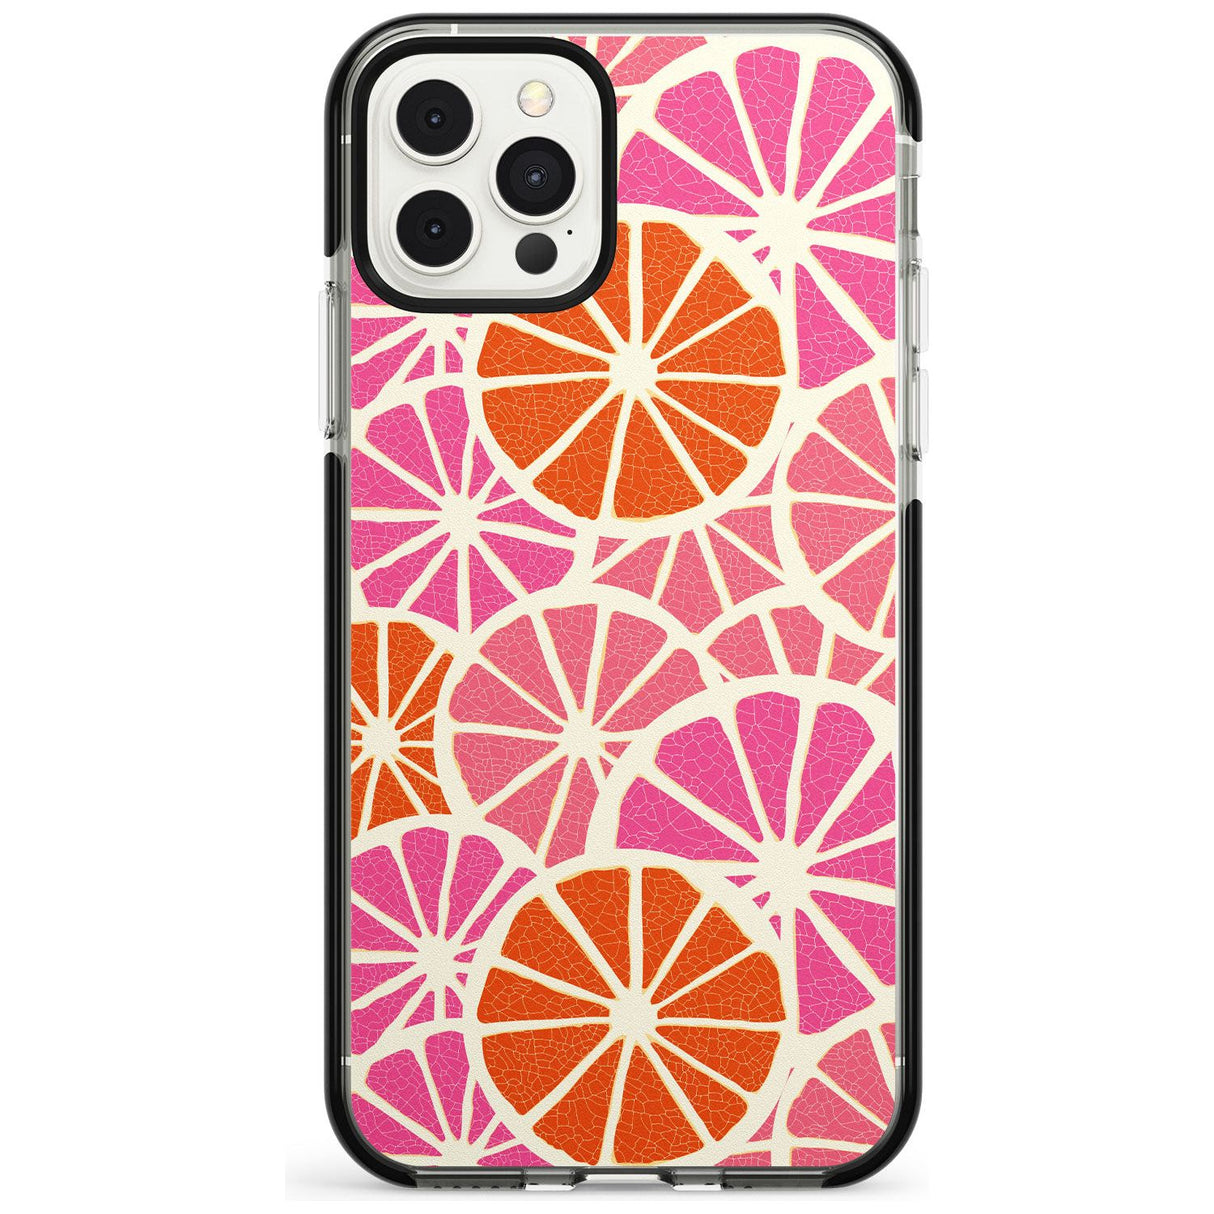 Citrus Slices Pink Fade Impact Phone Case for iPhone 11